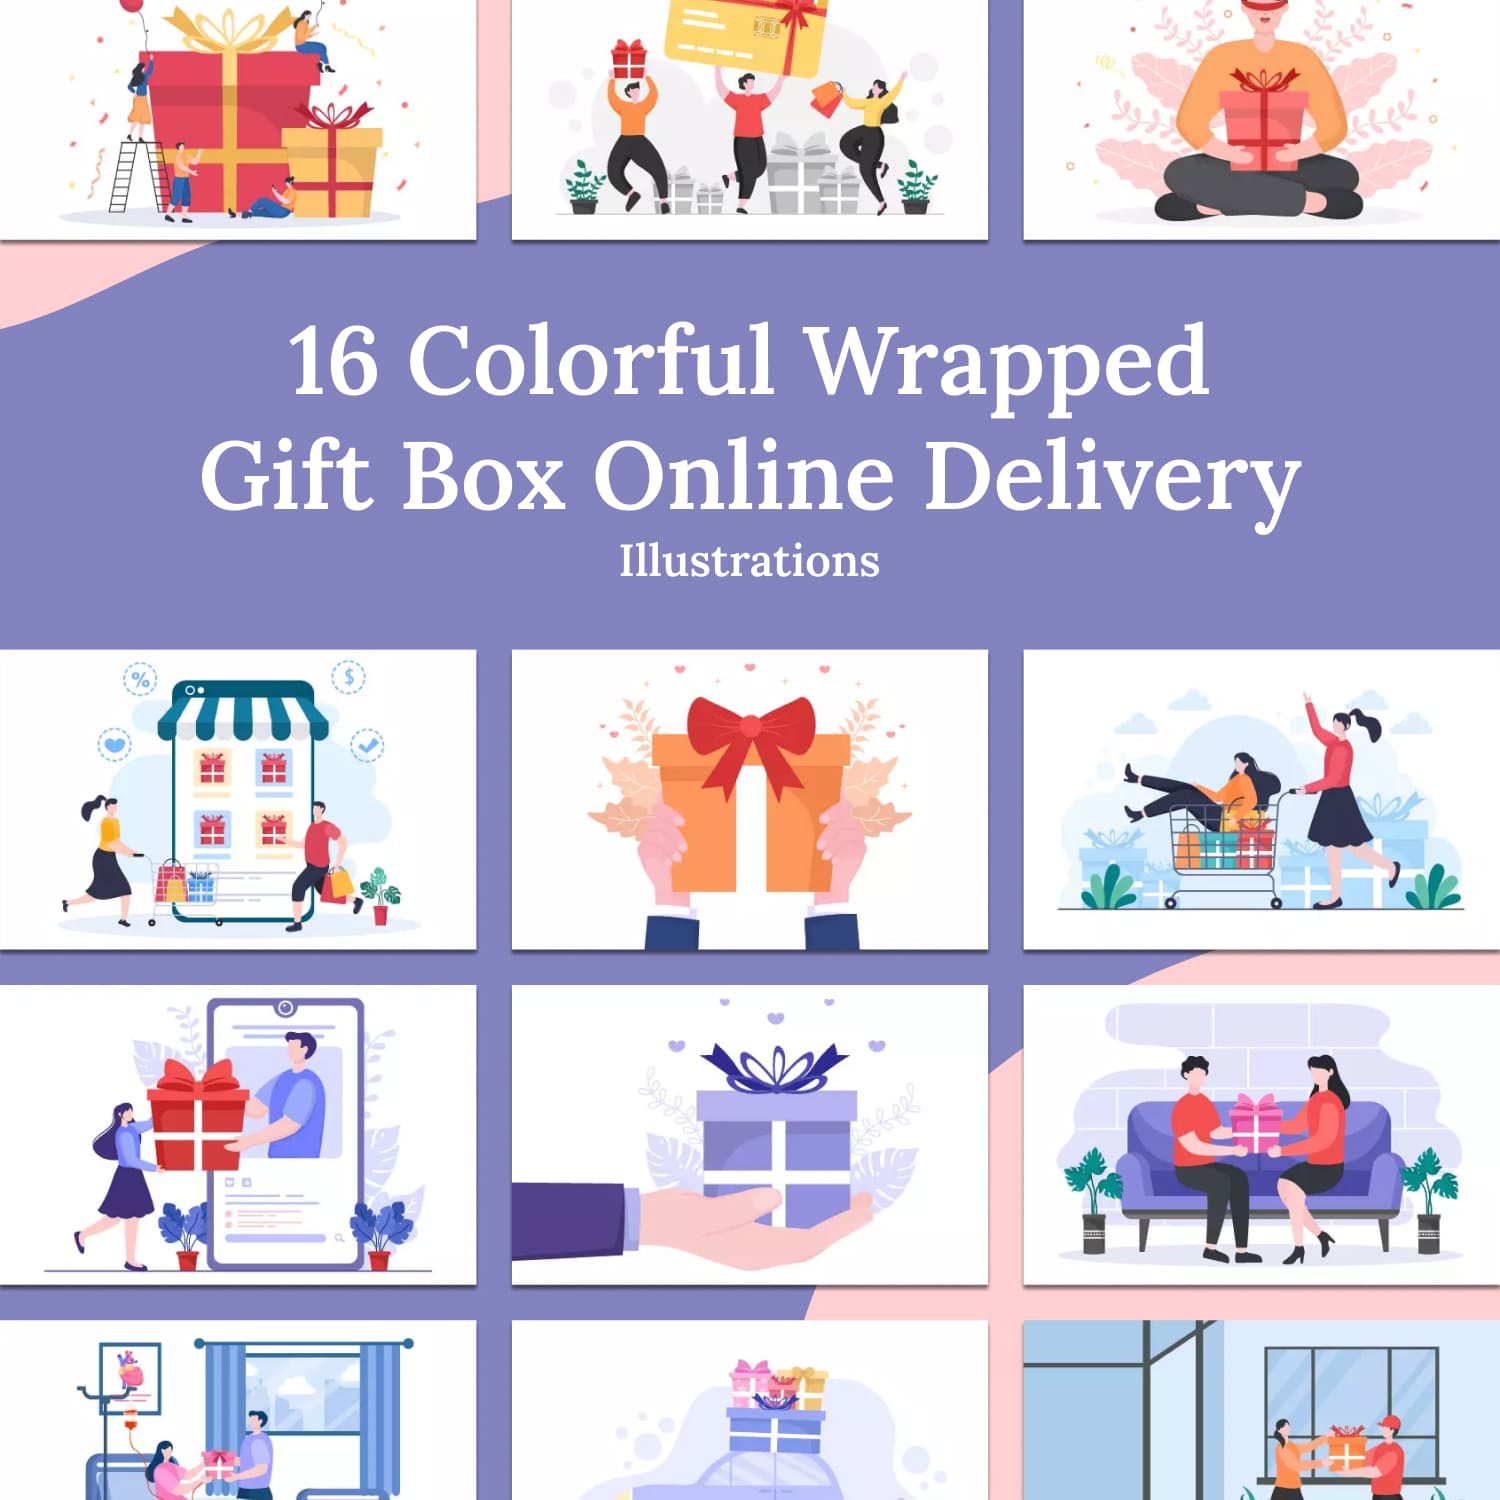 16 Colorful Wrapped Gift Box Online Delivery Illustrations.